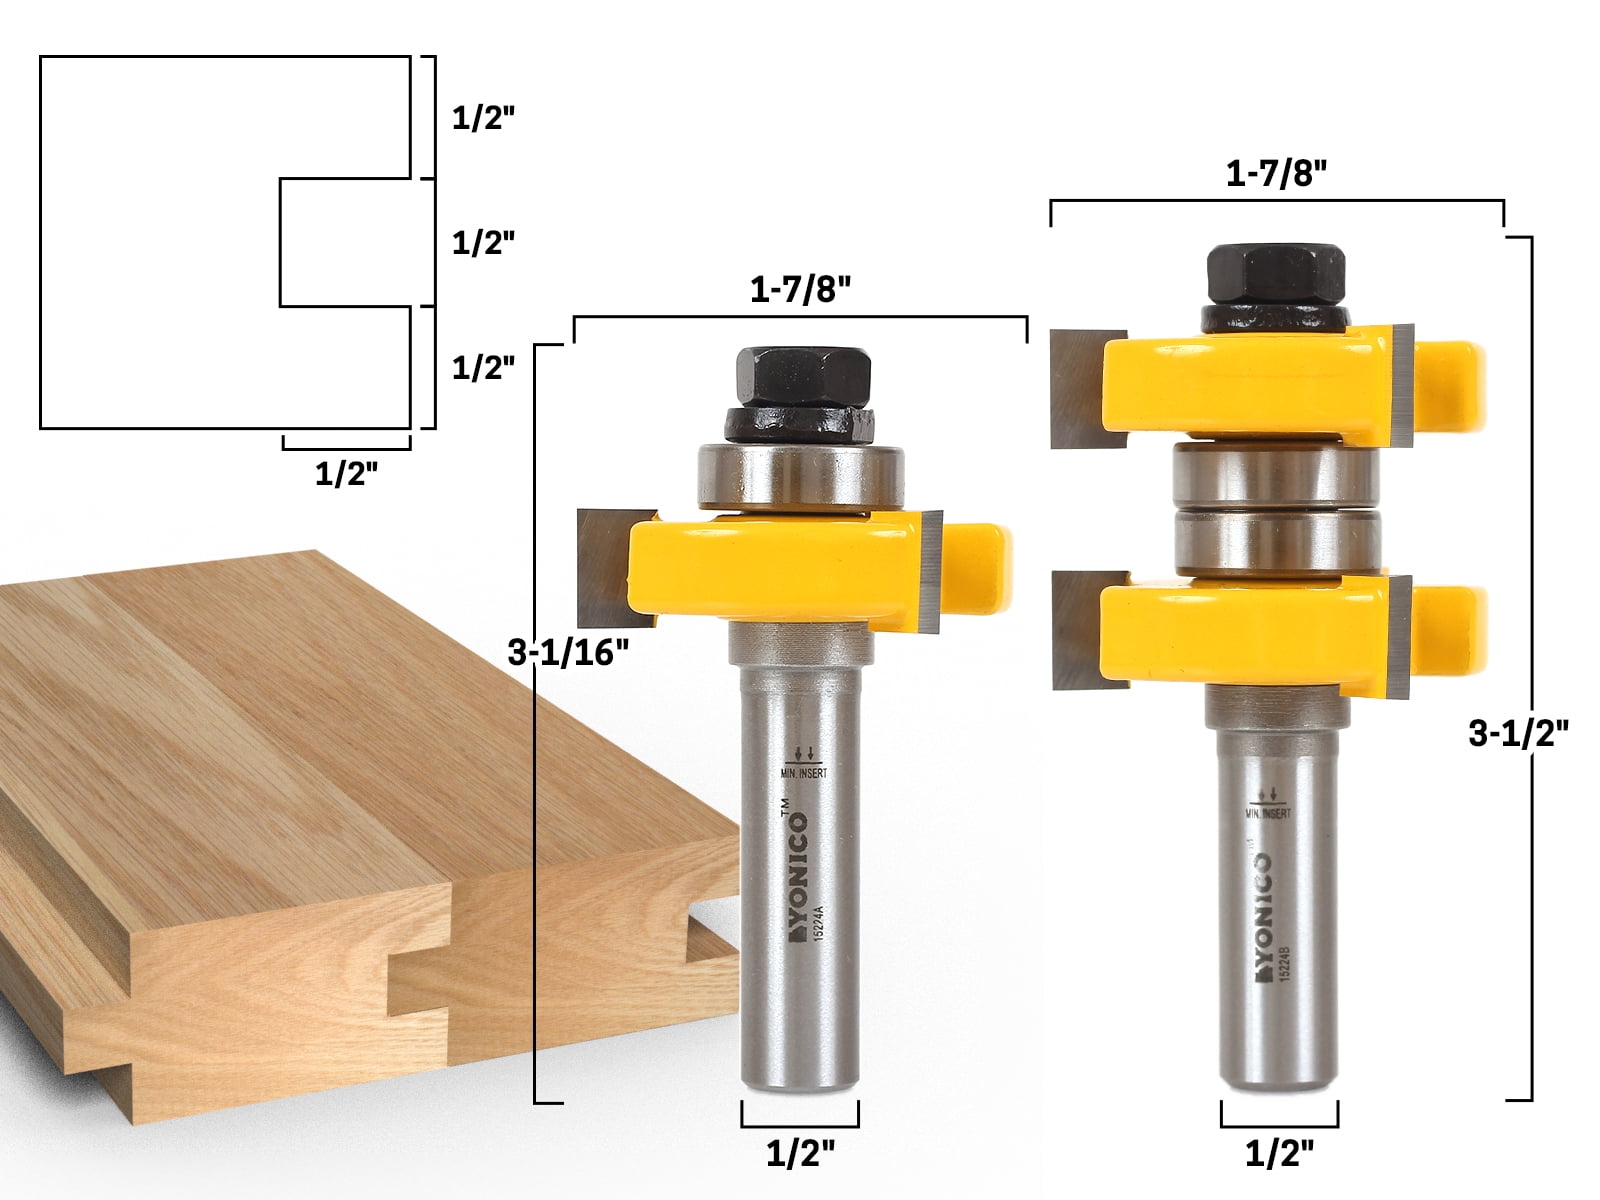 Yonico 15223 Matched Tongue and Groove Router Bit Set with Edge Banding 1/2-Inch Shank